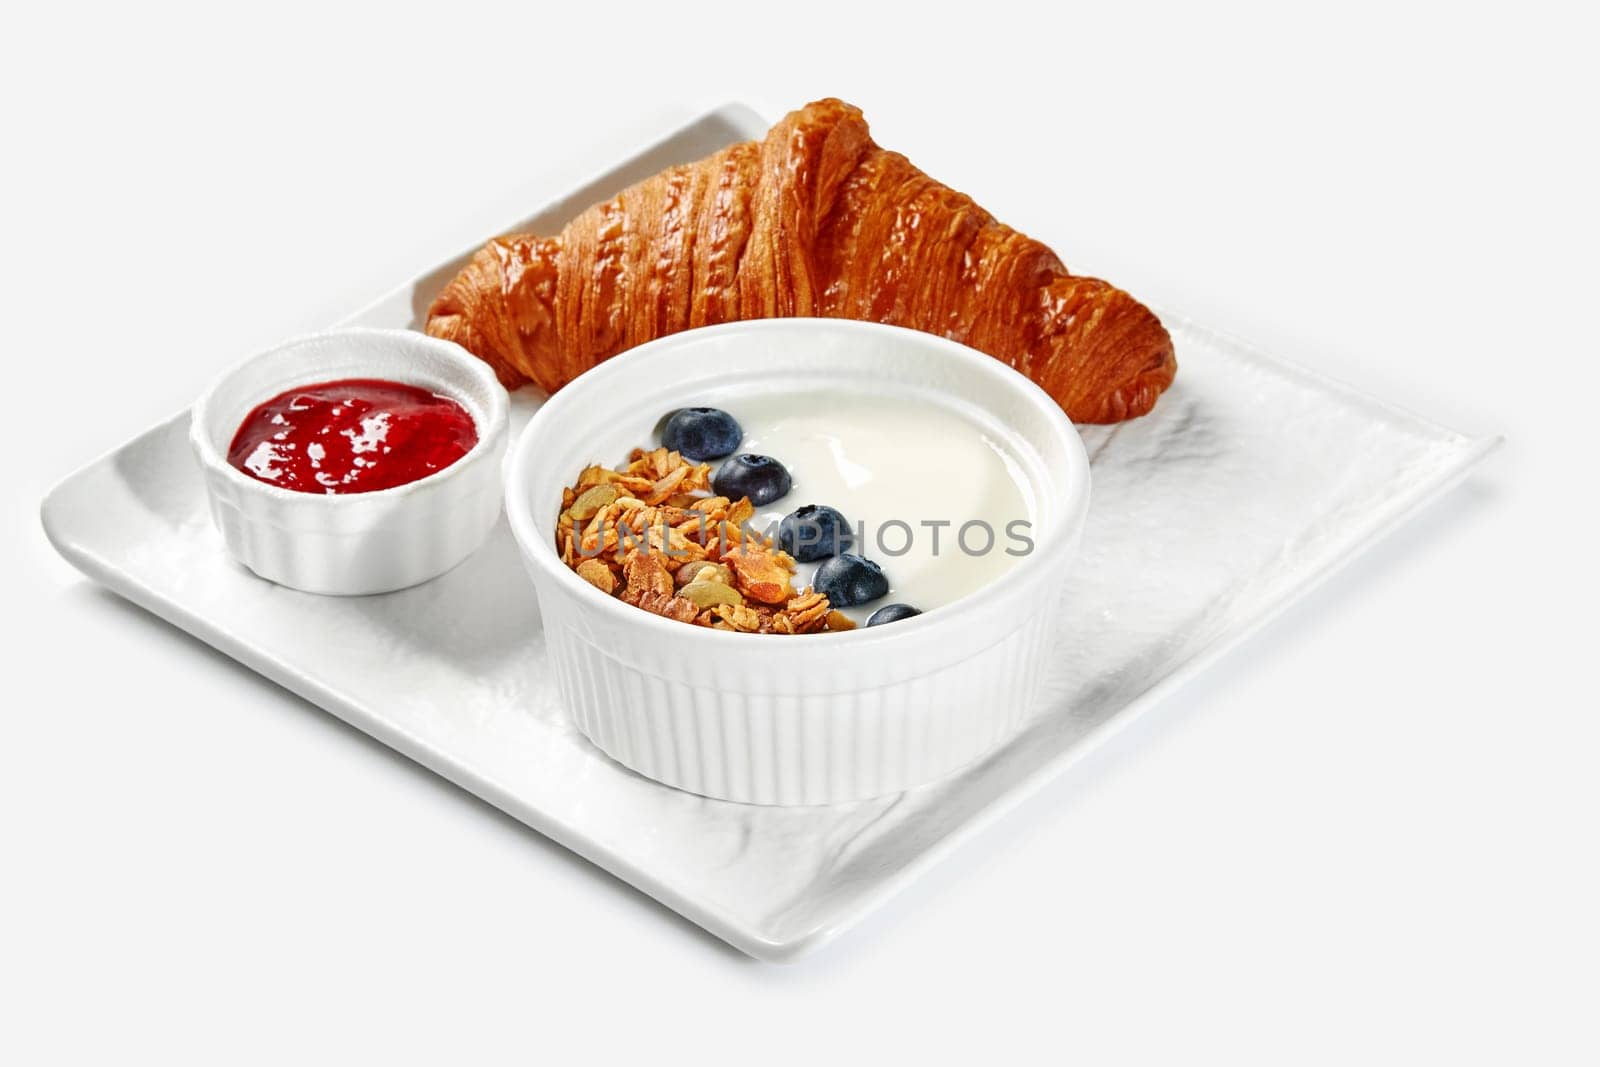 Classic flaky French croissant, smooth yogurt with granola and fresh blueberries, and homemade berry compote served as breakfast on white tray